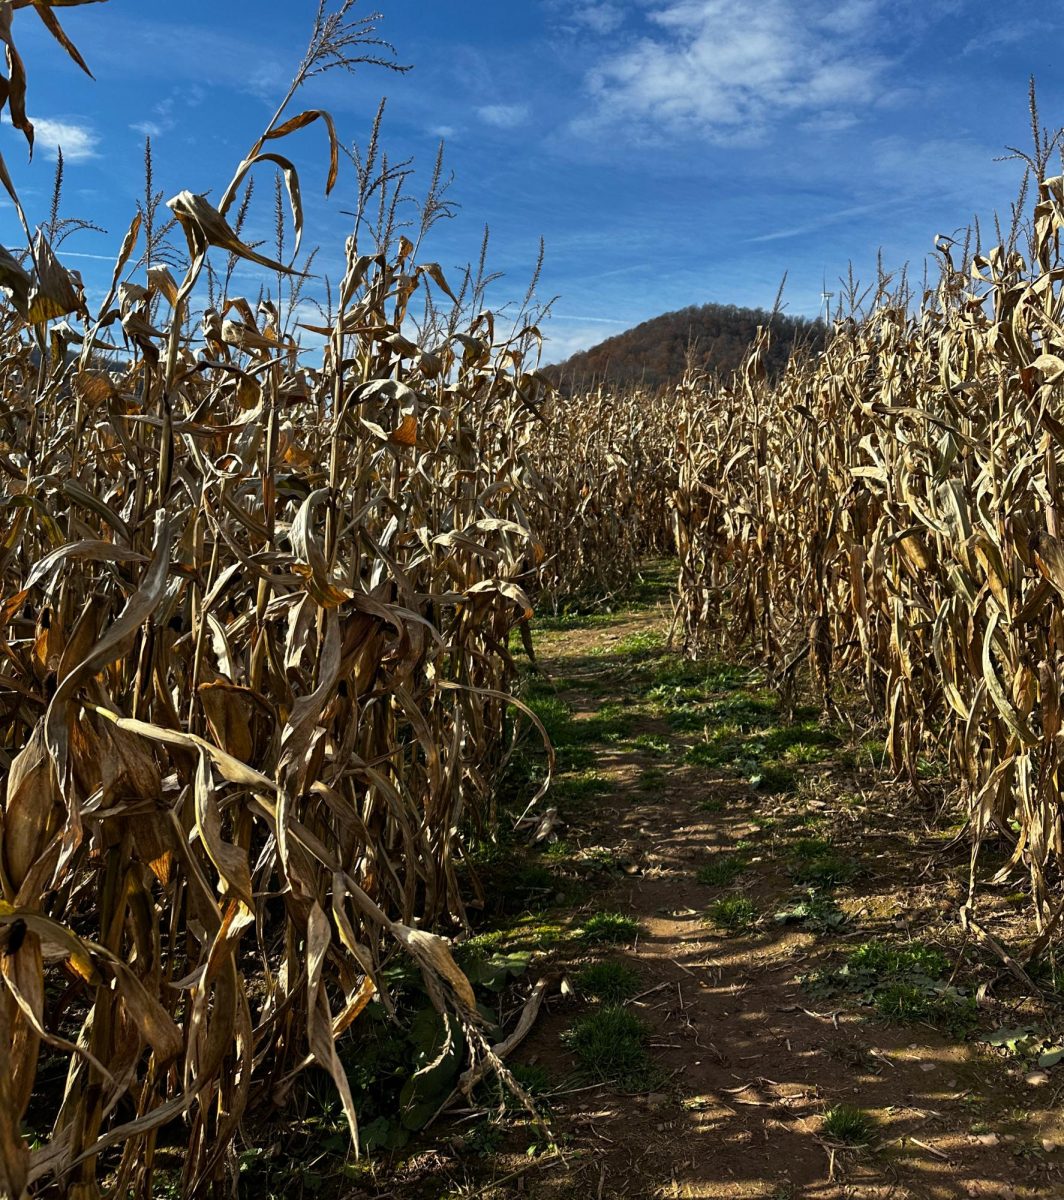 Finding a path. Going to a corn maze during the fall season is always a good way to have fun with friends and family. 